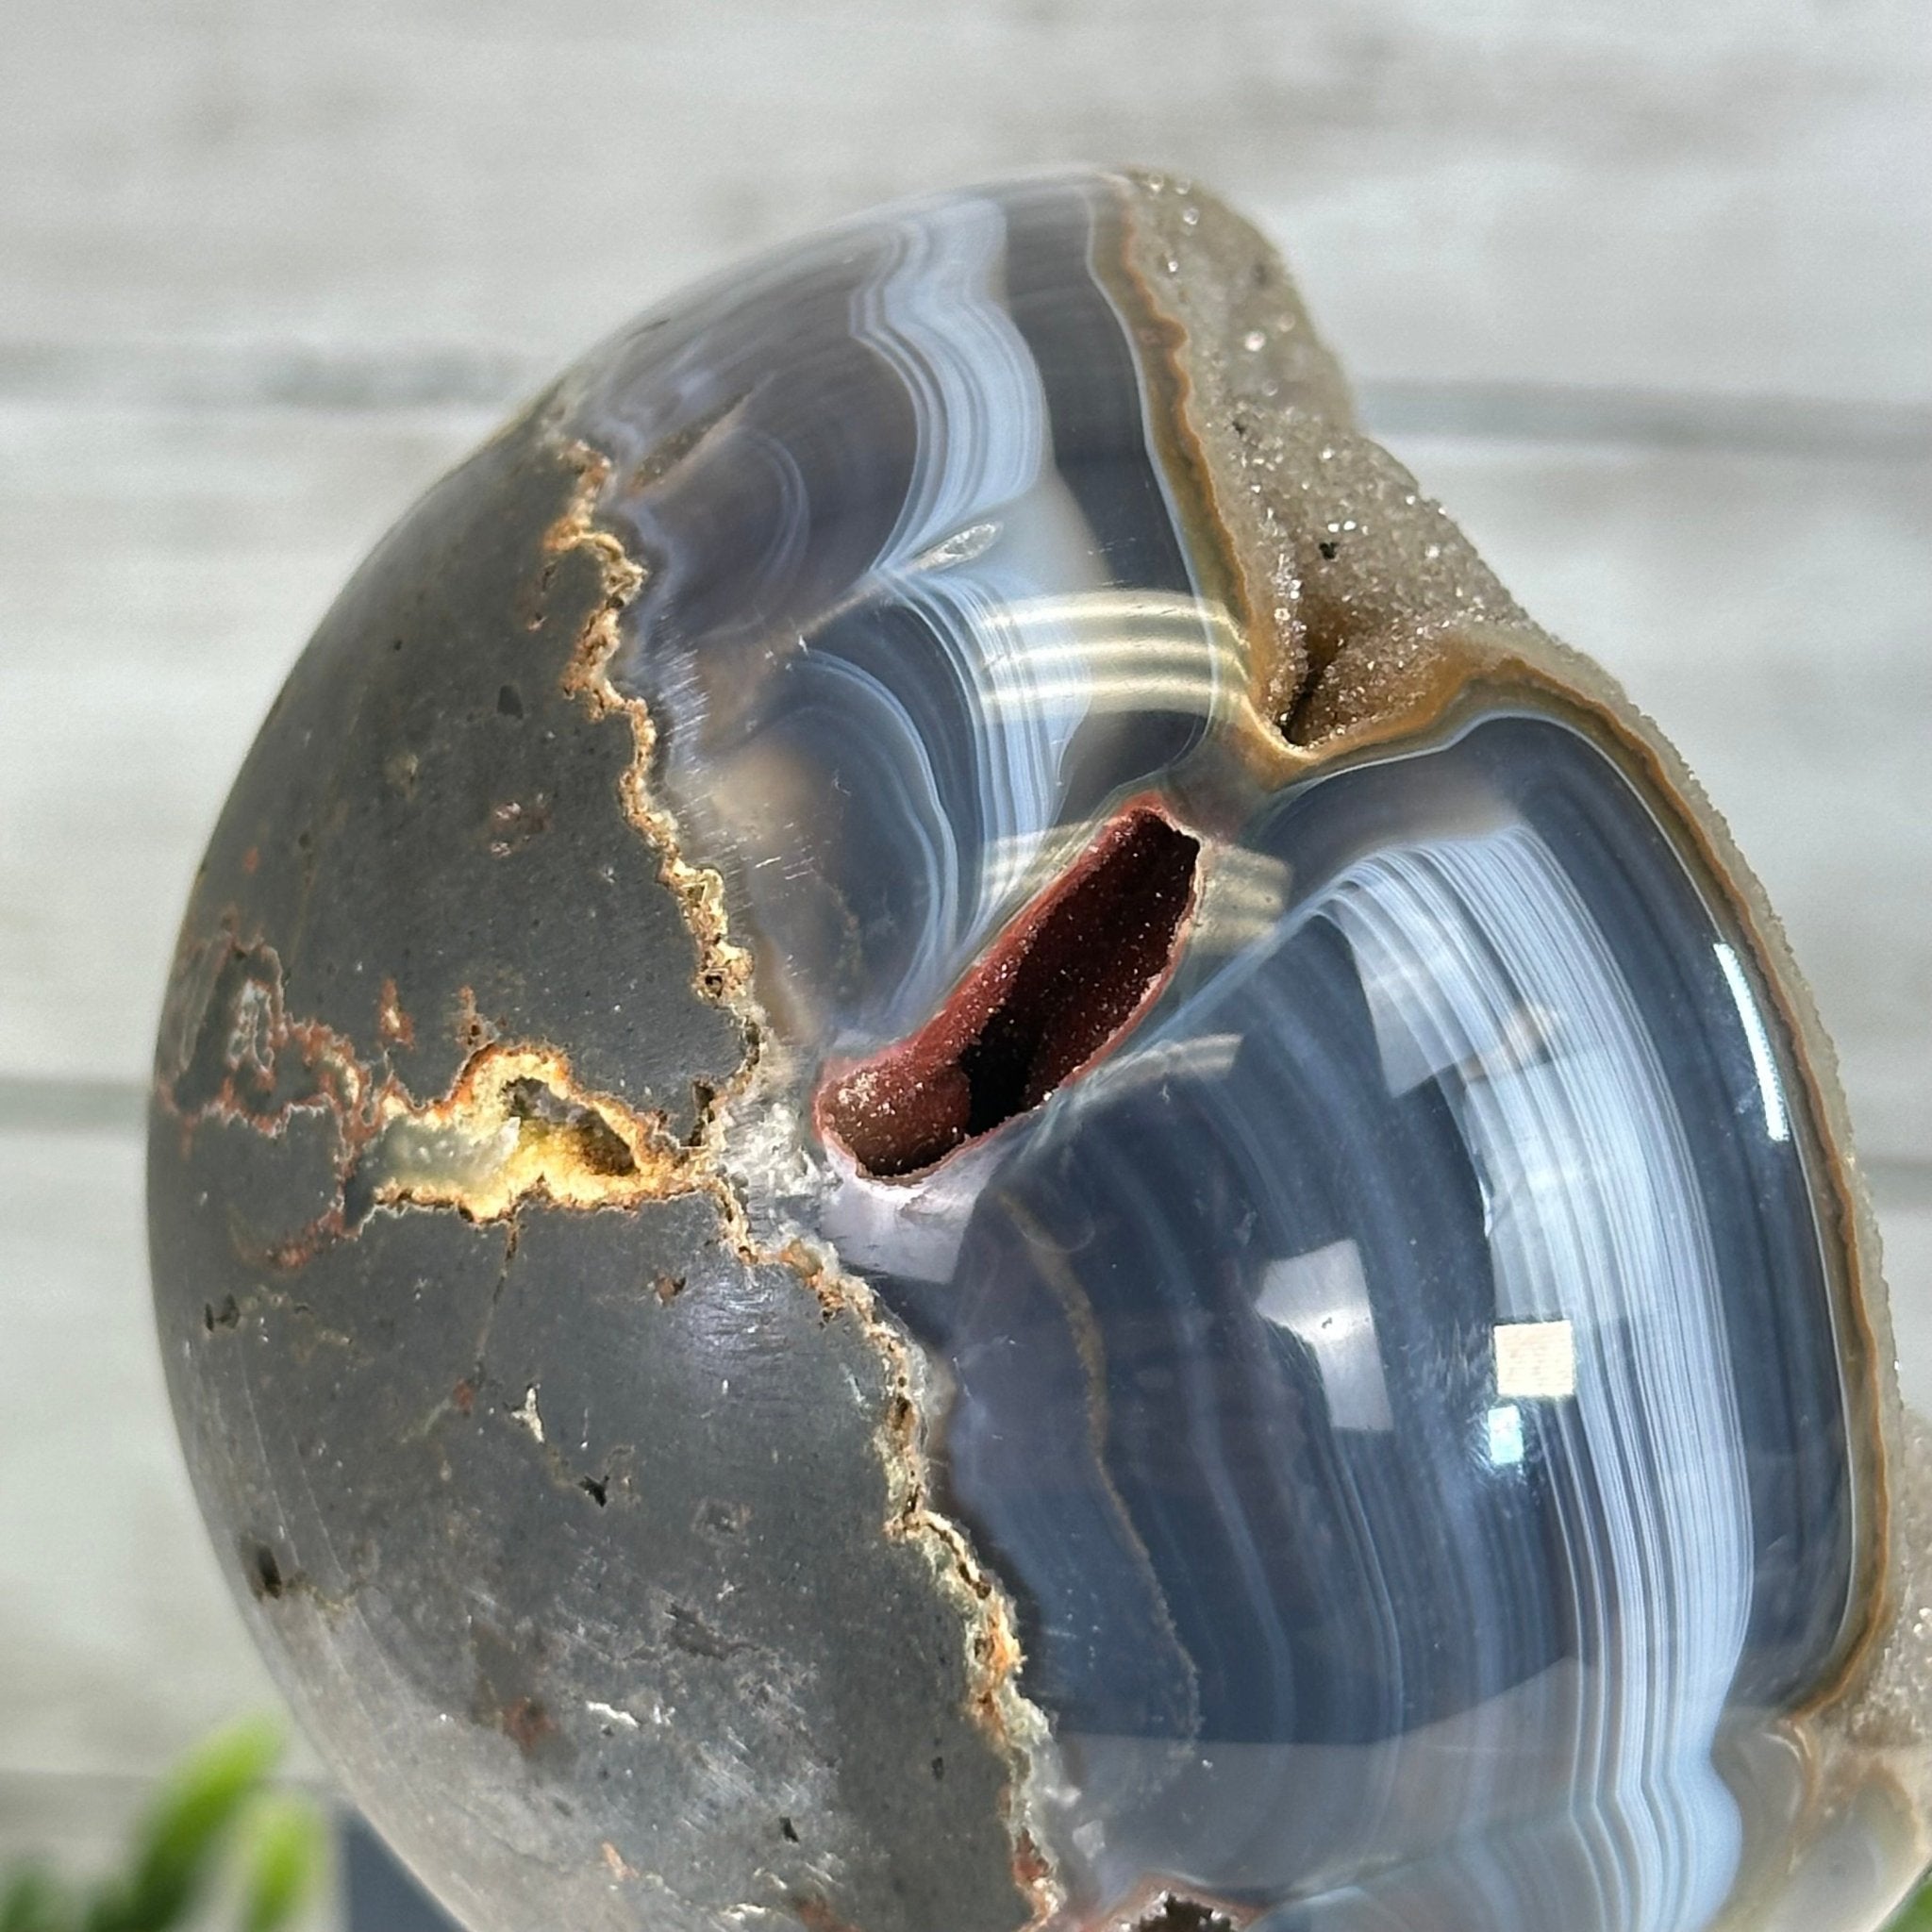 Druzy Agate Sphere on a Metal Stand, 1.5 lbs & 7.2" Tall #5634-0008 - Brazil GemsBrazil GemsDruzy Agate Sphere on a Metal Stand, 1.5 lbs & 7.2" Tall #5634-0008Spheres5634-0008